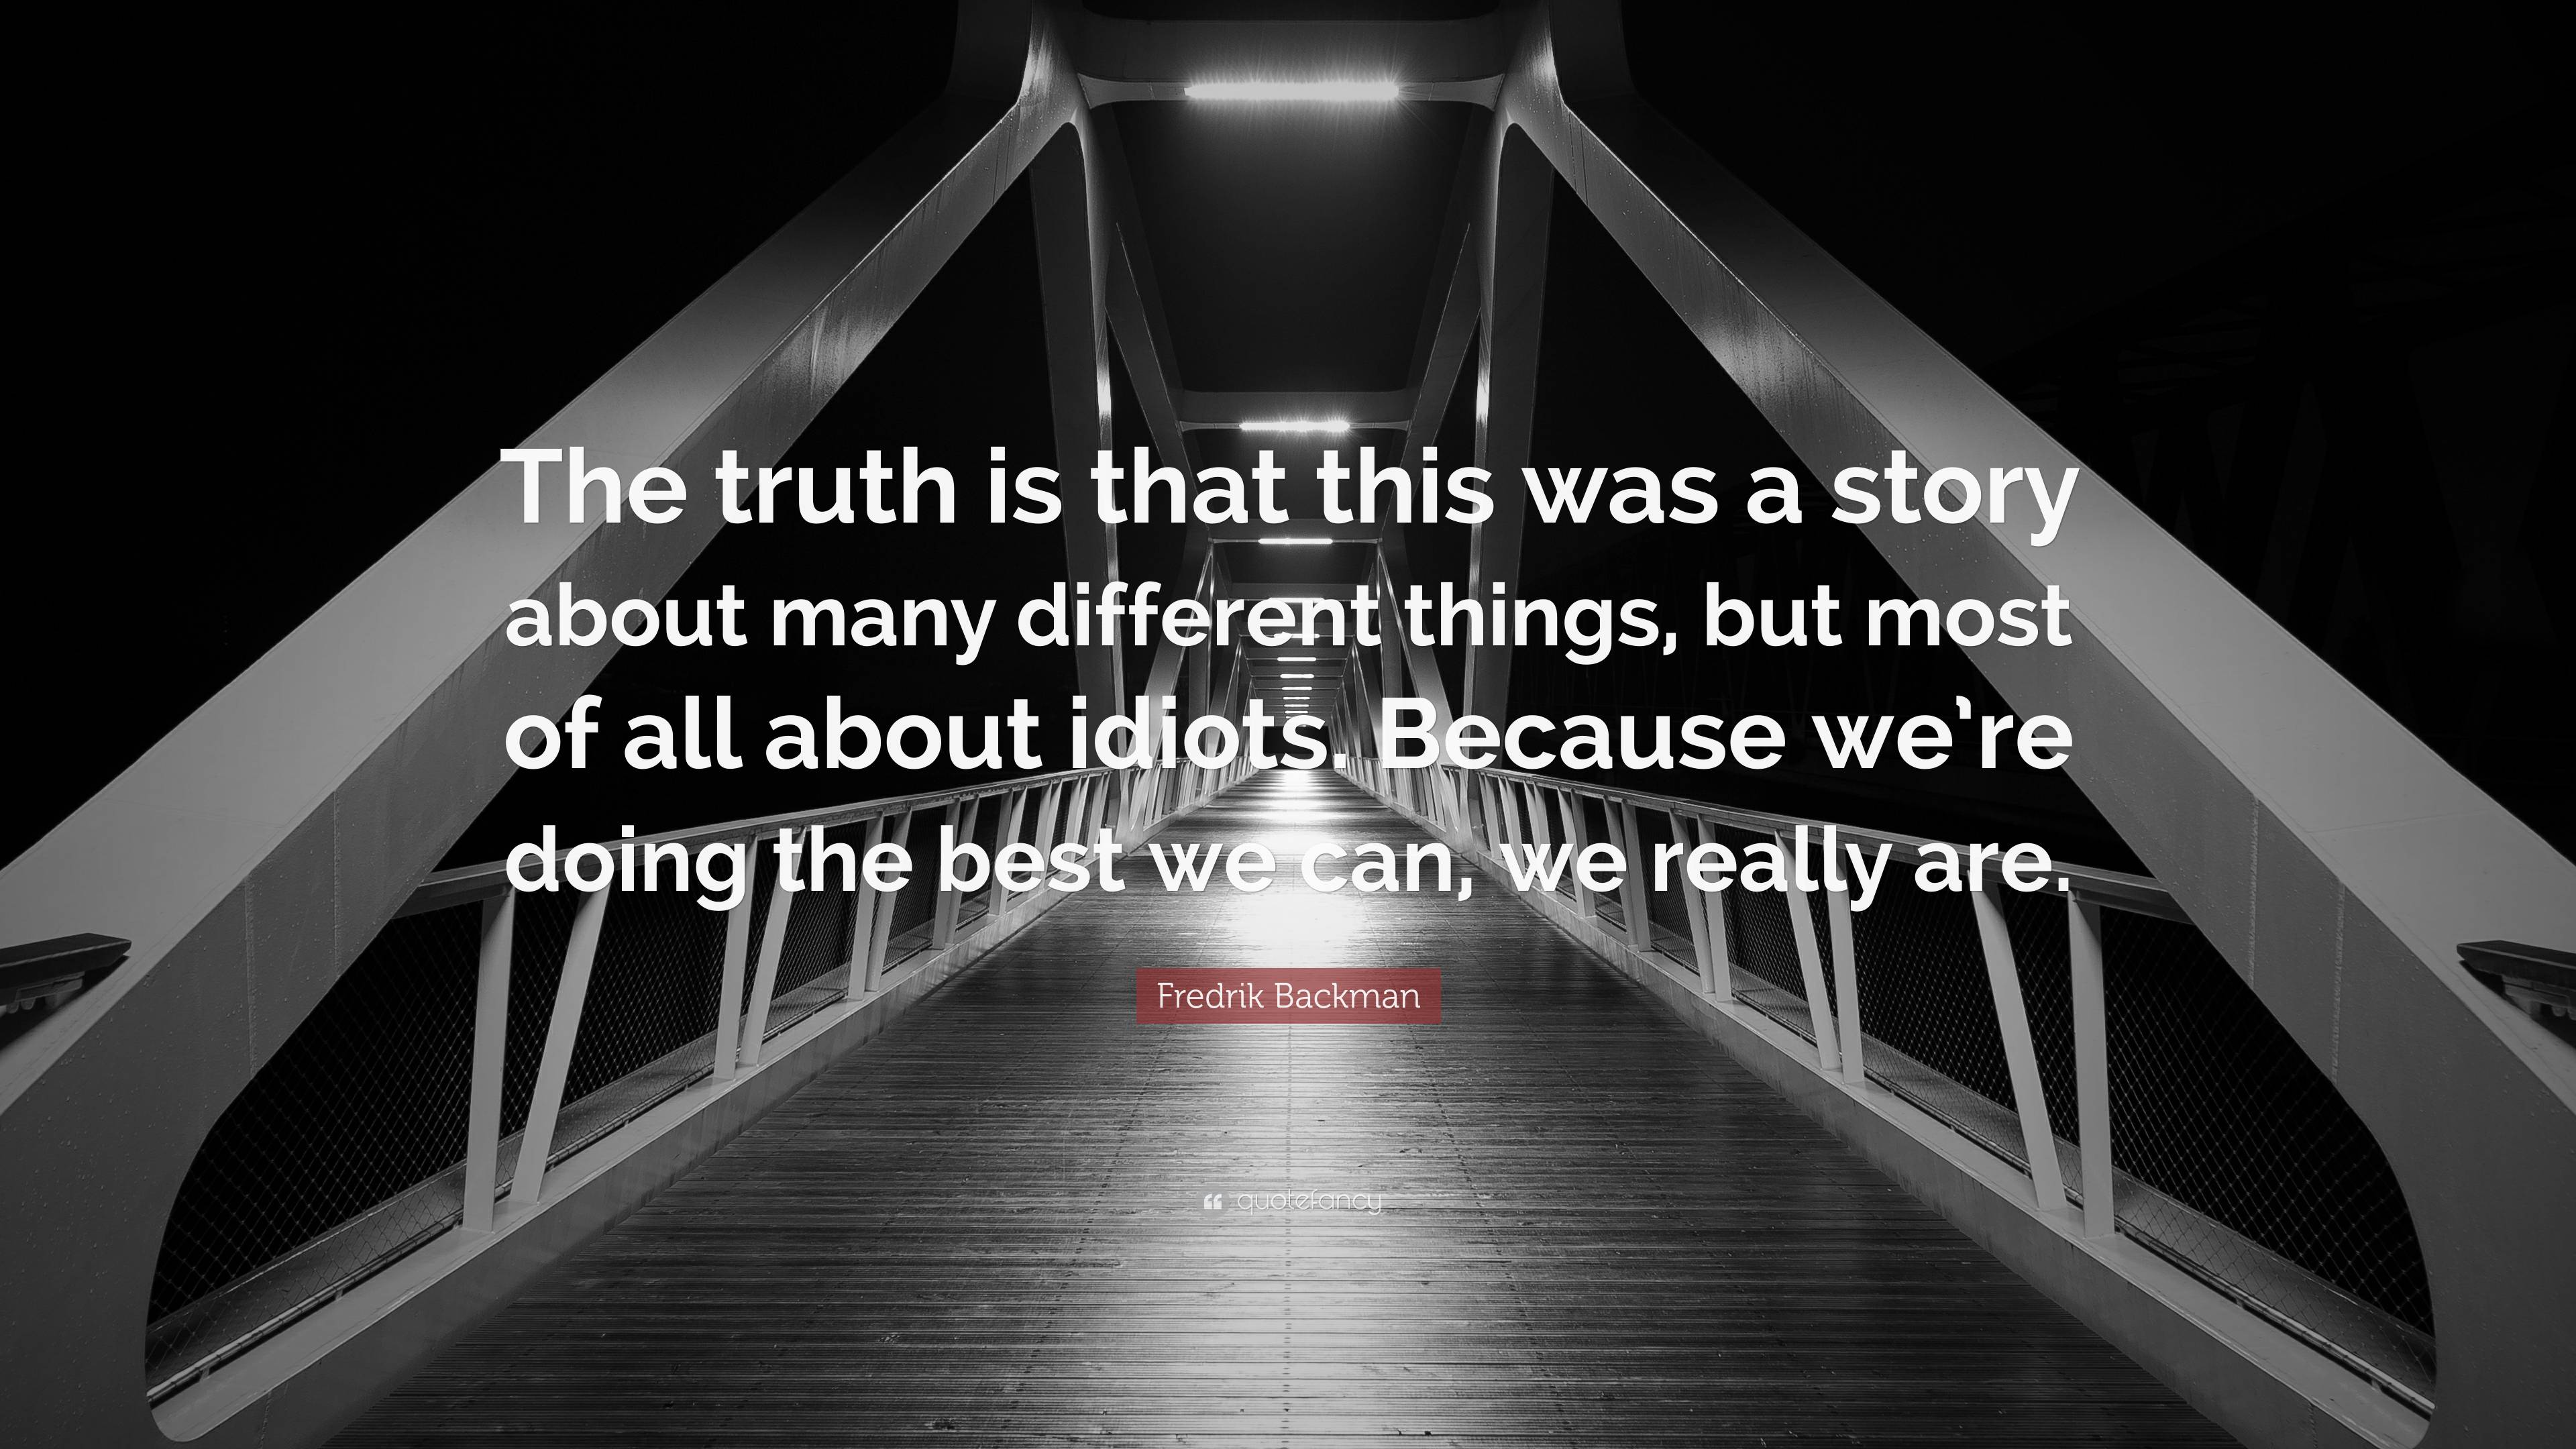 Fredrik Backman Quote: “The truth is that this was a story about many ...